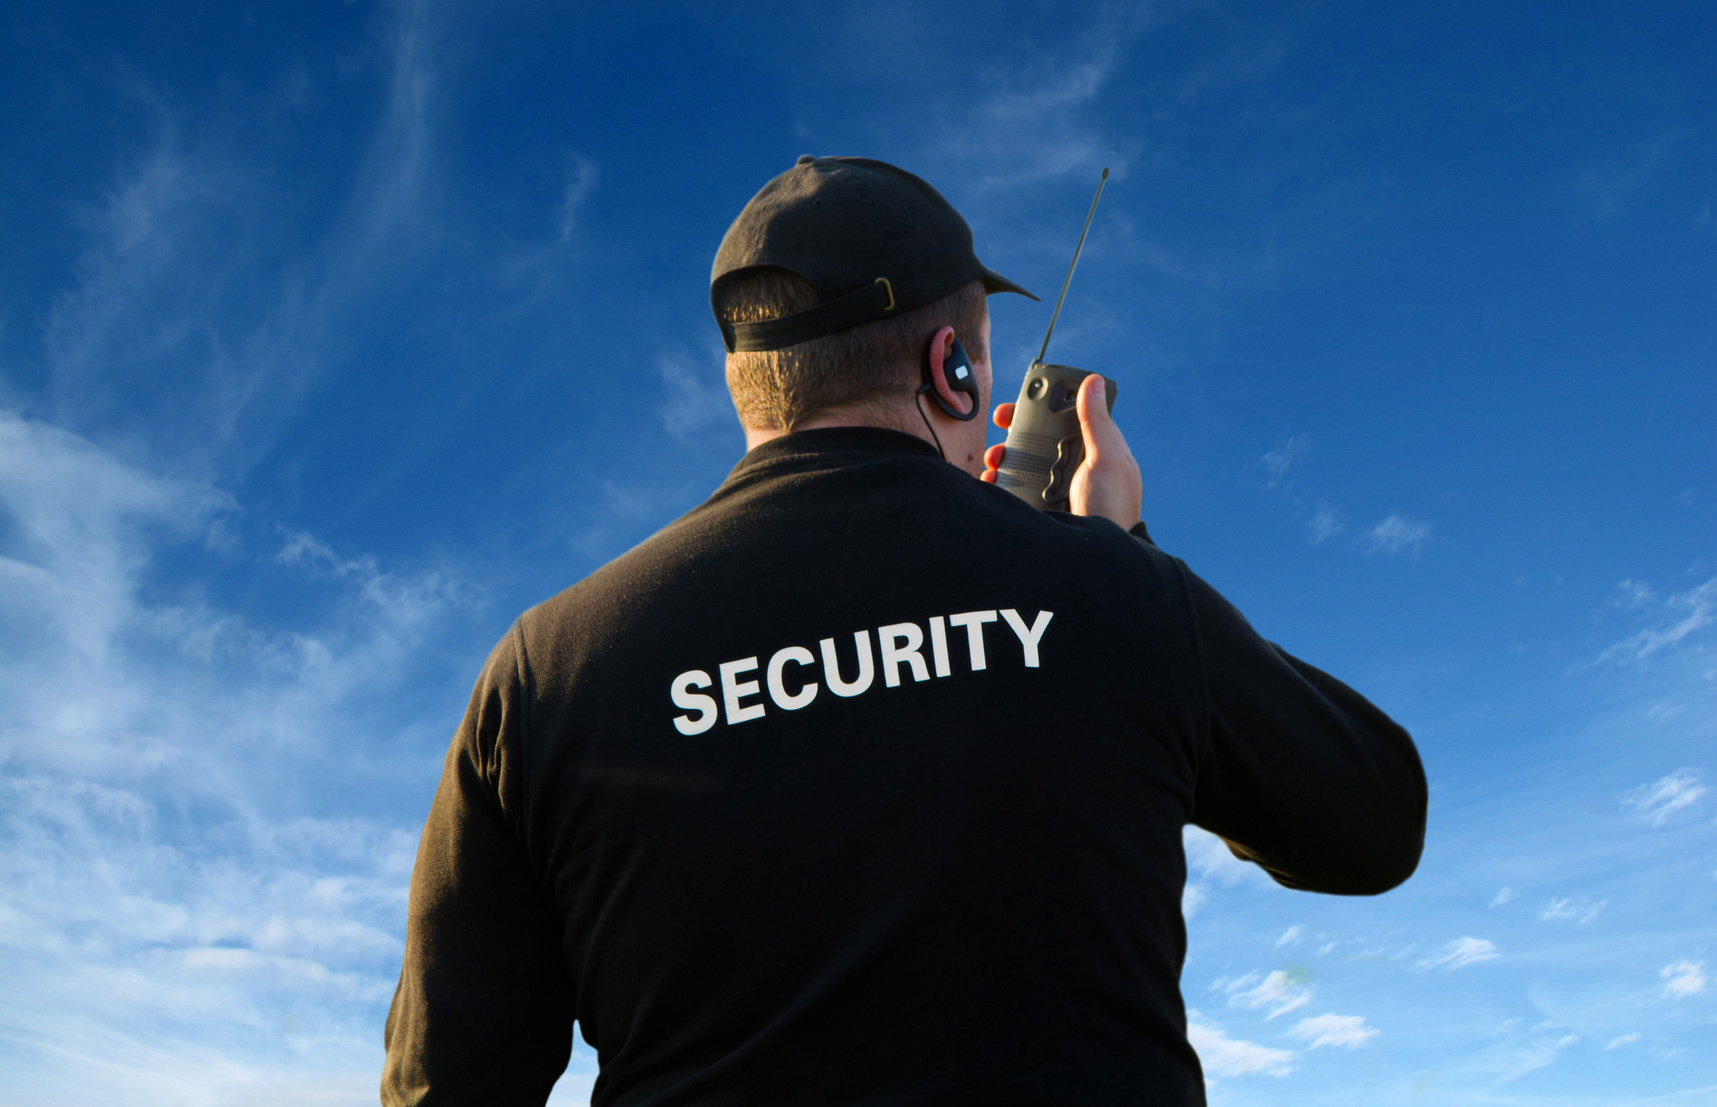 trident-security-1_the-main-responsibilities-of-private-security-guards_image.jpg